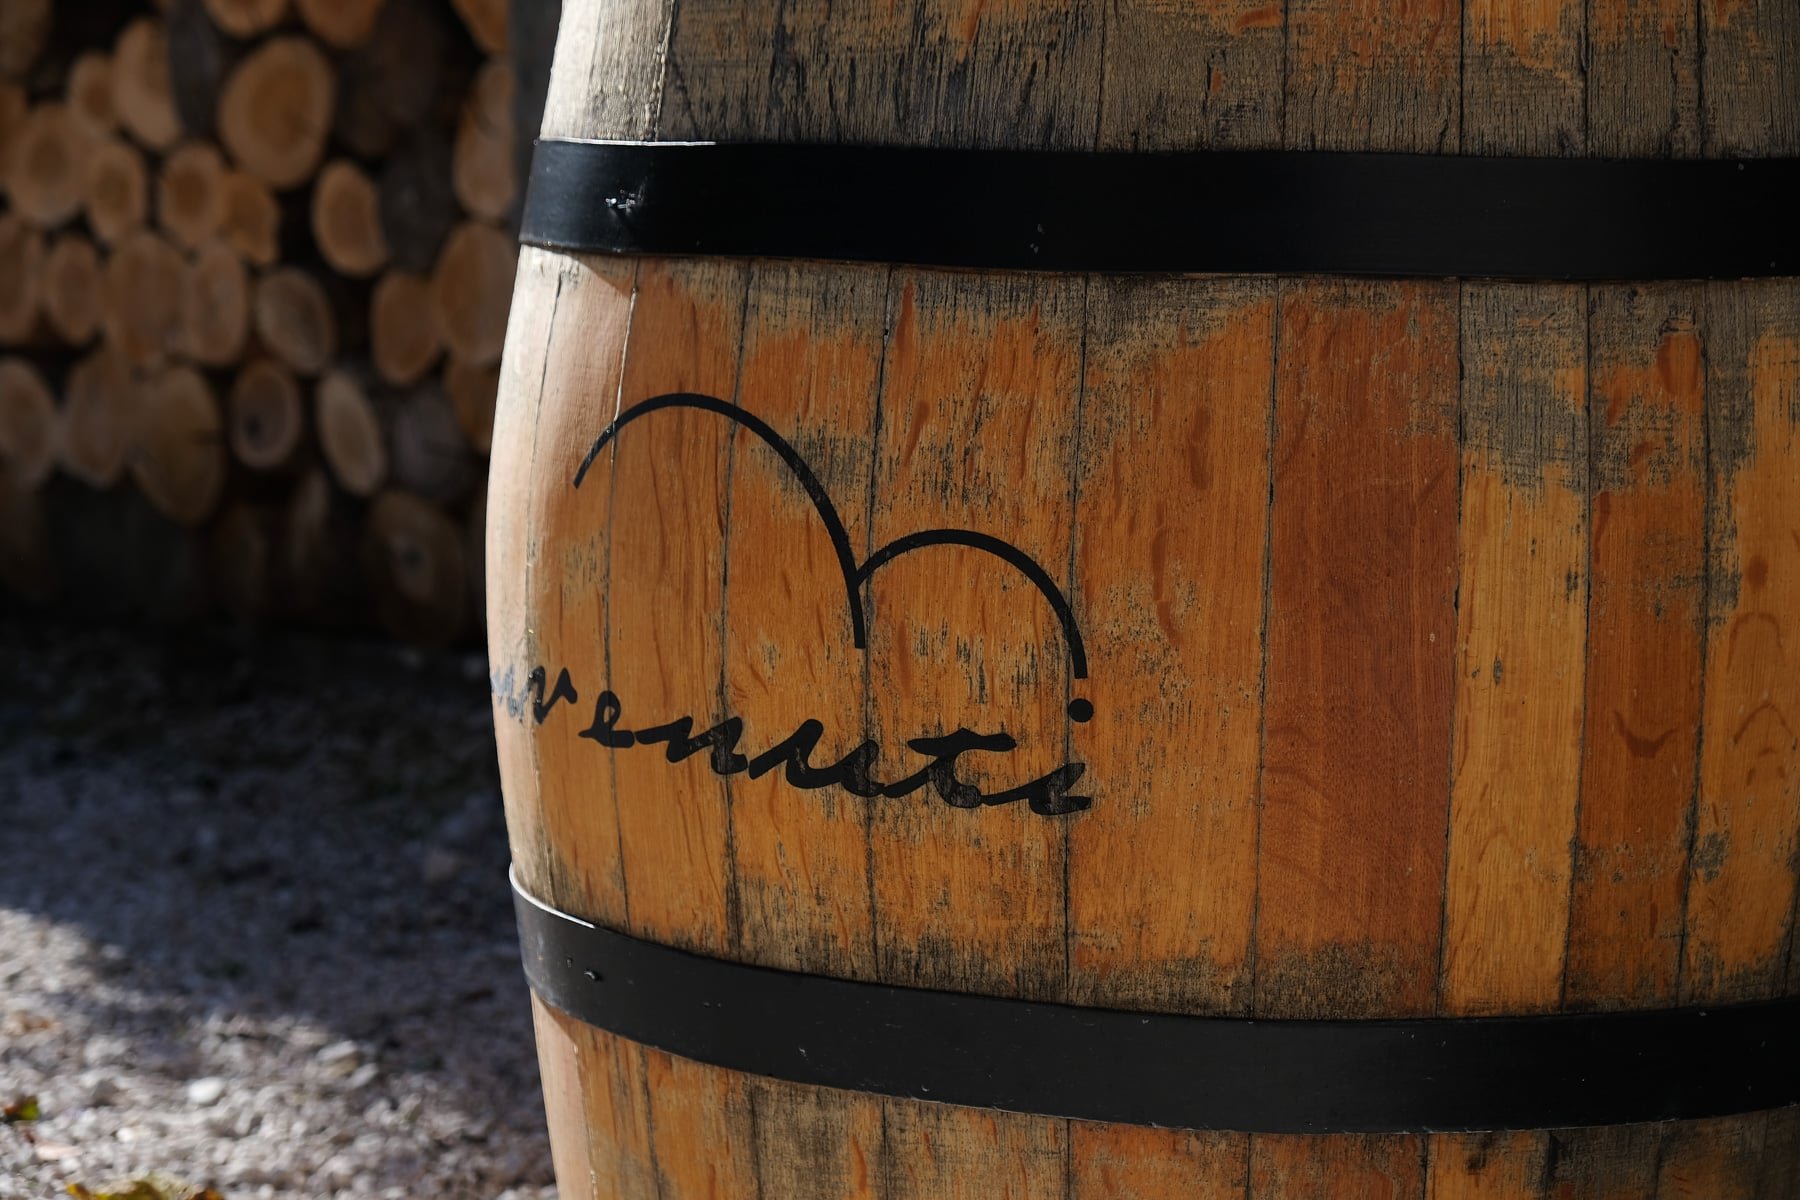 A wooden barrel with the Benvenuti logo on it in front of a pile of logs from Istria at benvenuti Winery, Istria.